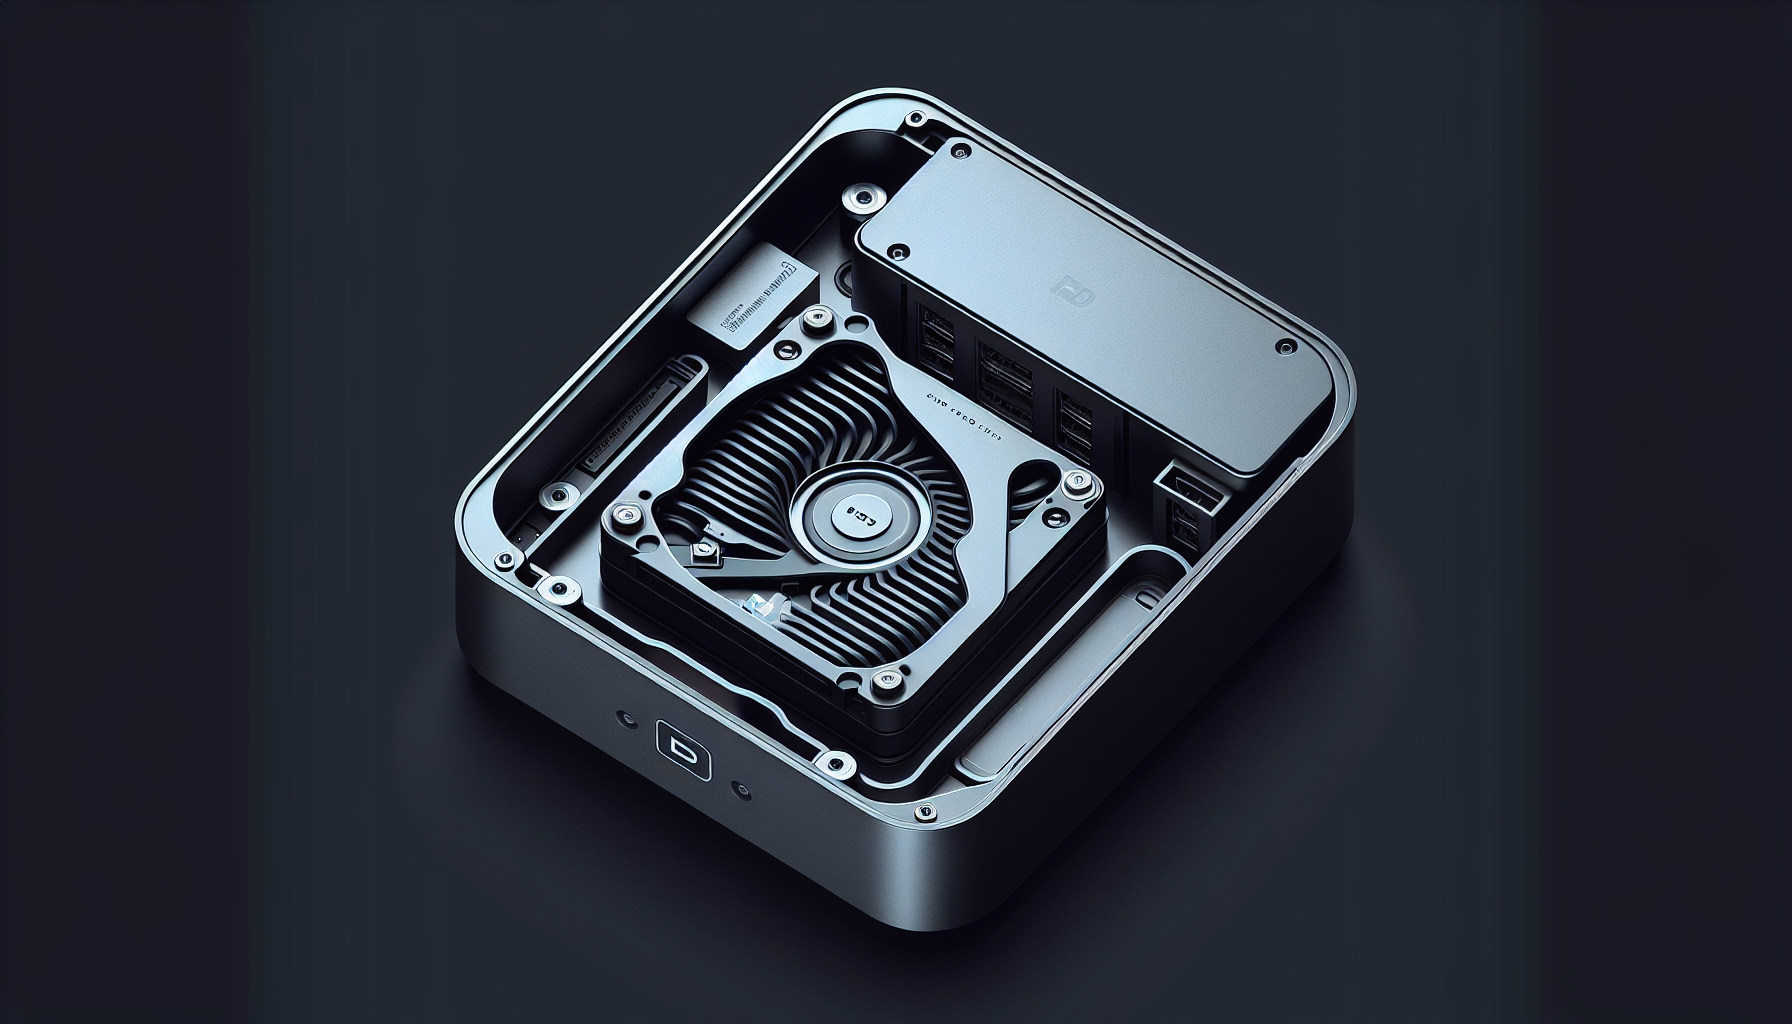 How Many Internal Storage Drives Can You Fit In A Mini PC?